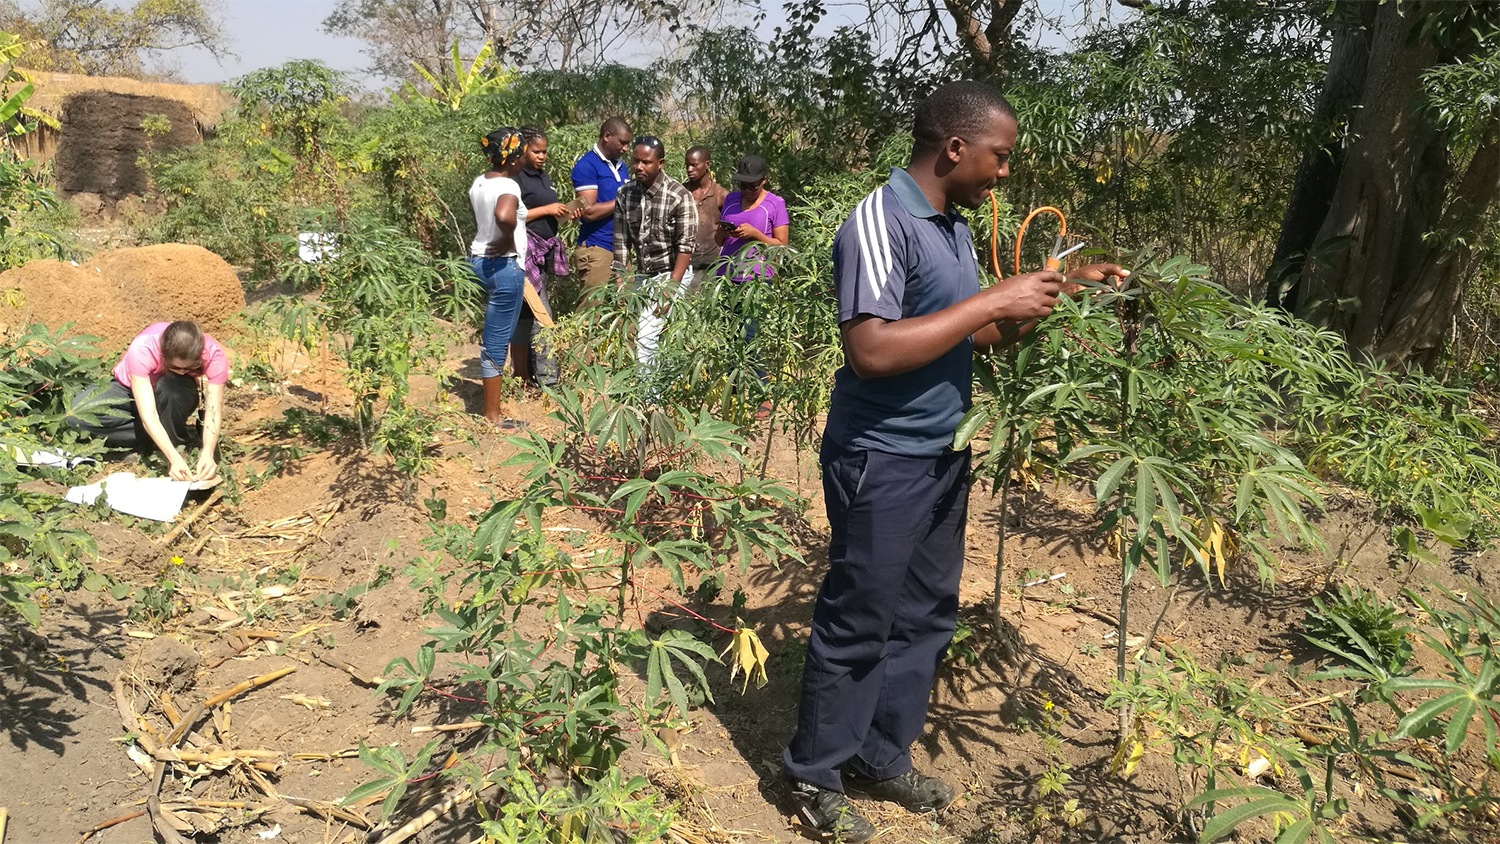 A survey group collects plant and whitefly samples while talking to a farmer outside Mbeya, Tanzania. Photo credit: Joseph Ndunguru.